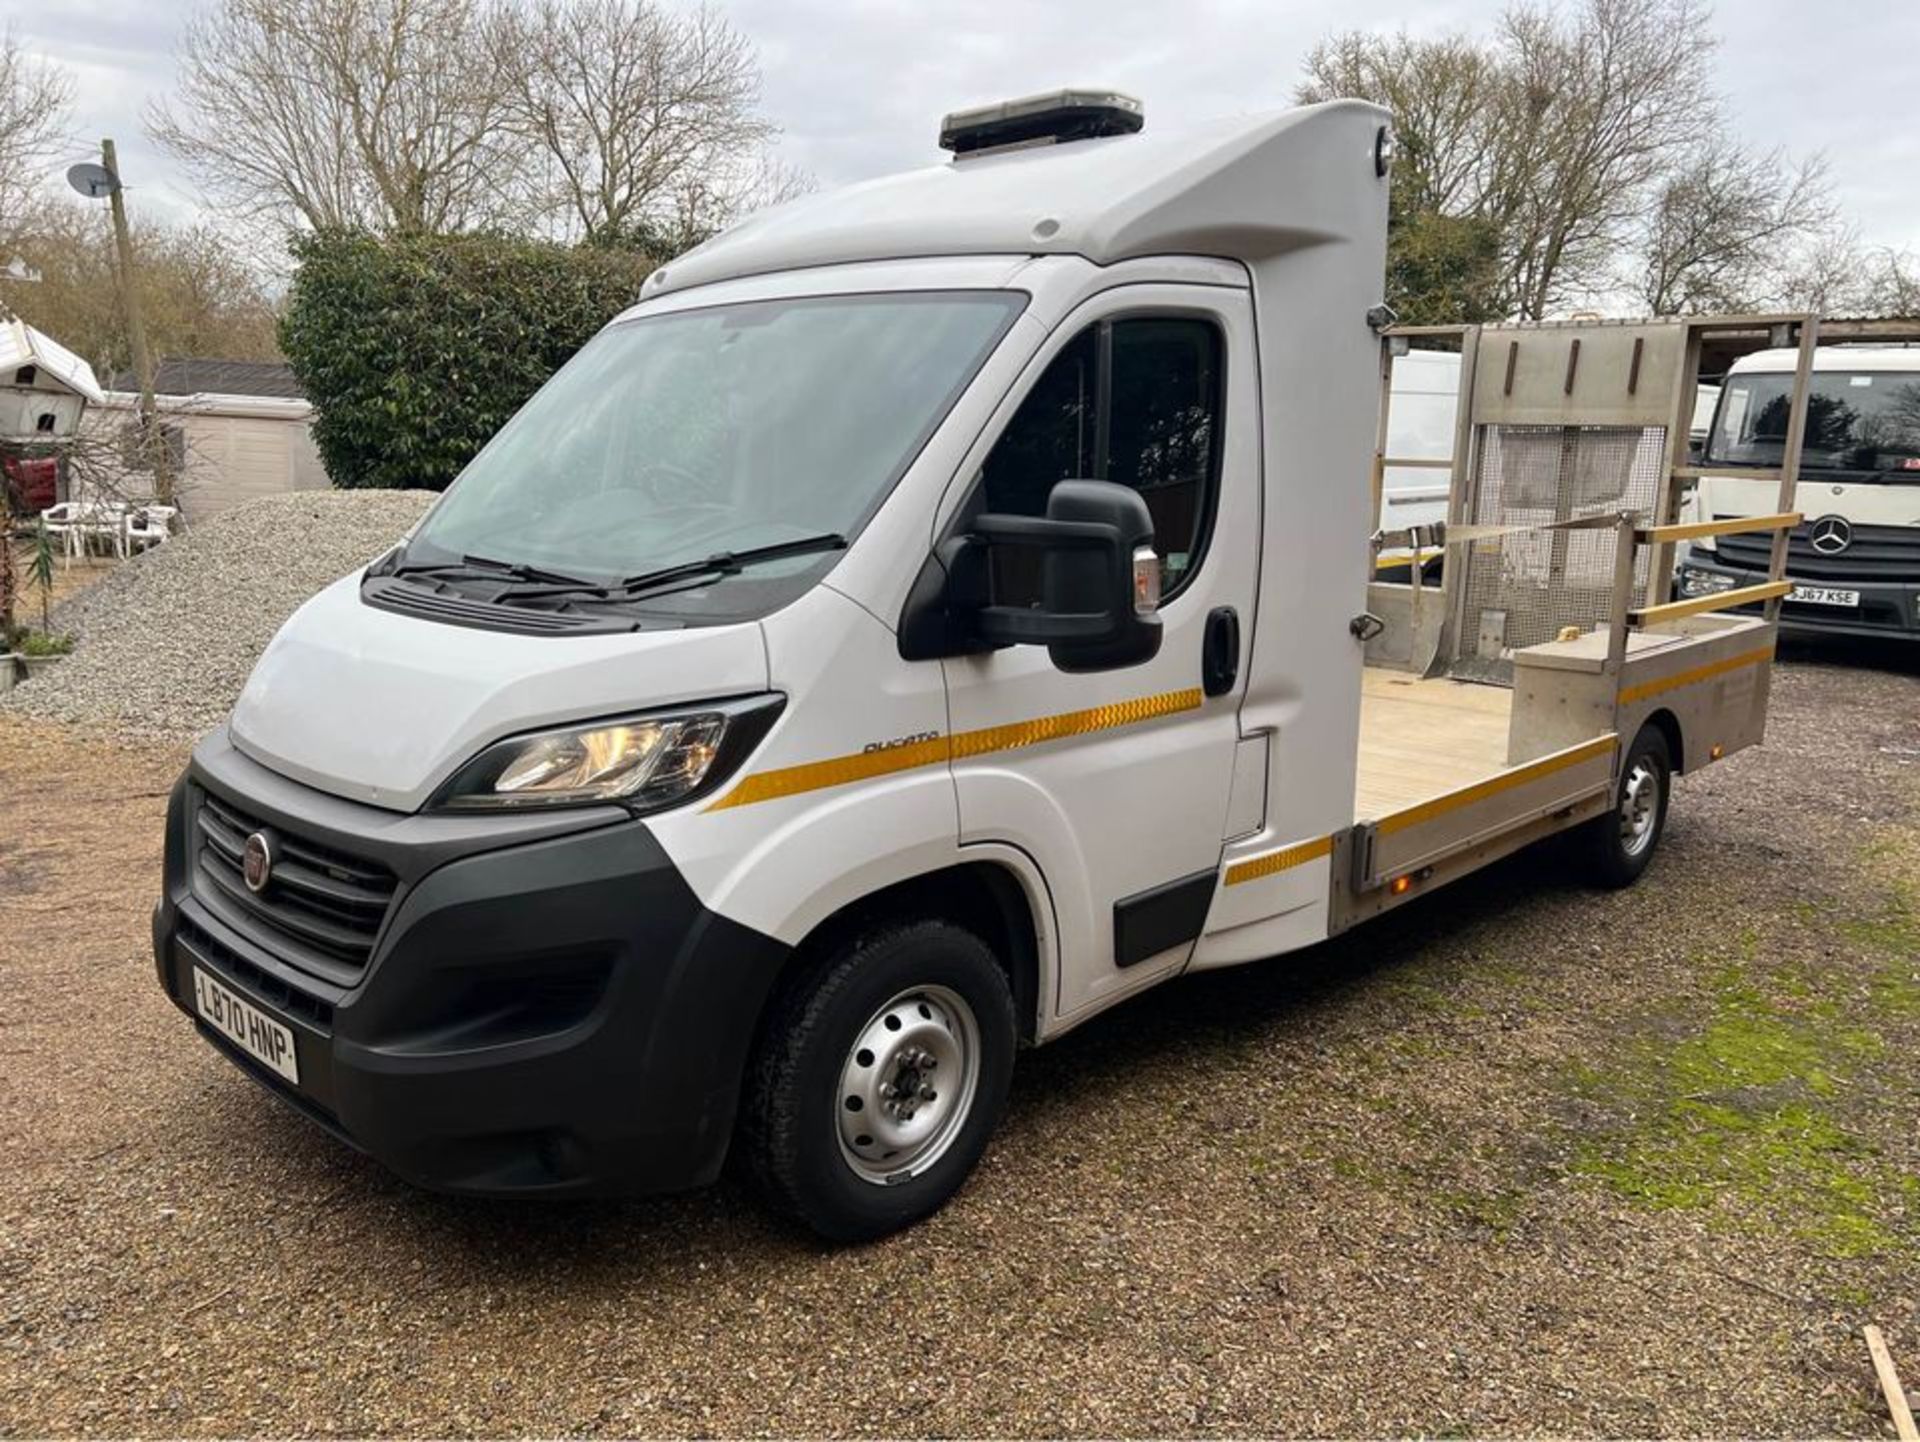 2021, FIAT Ducato 2.3 TD - Low Load Dropside (Traffic Management Truck) - Image 5 of 14